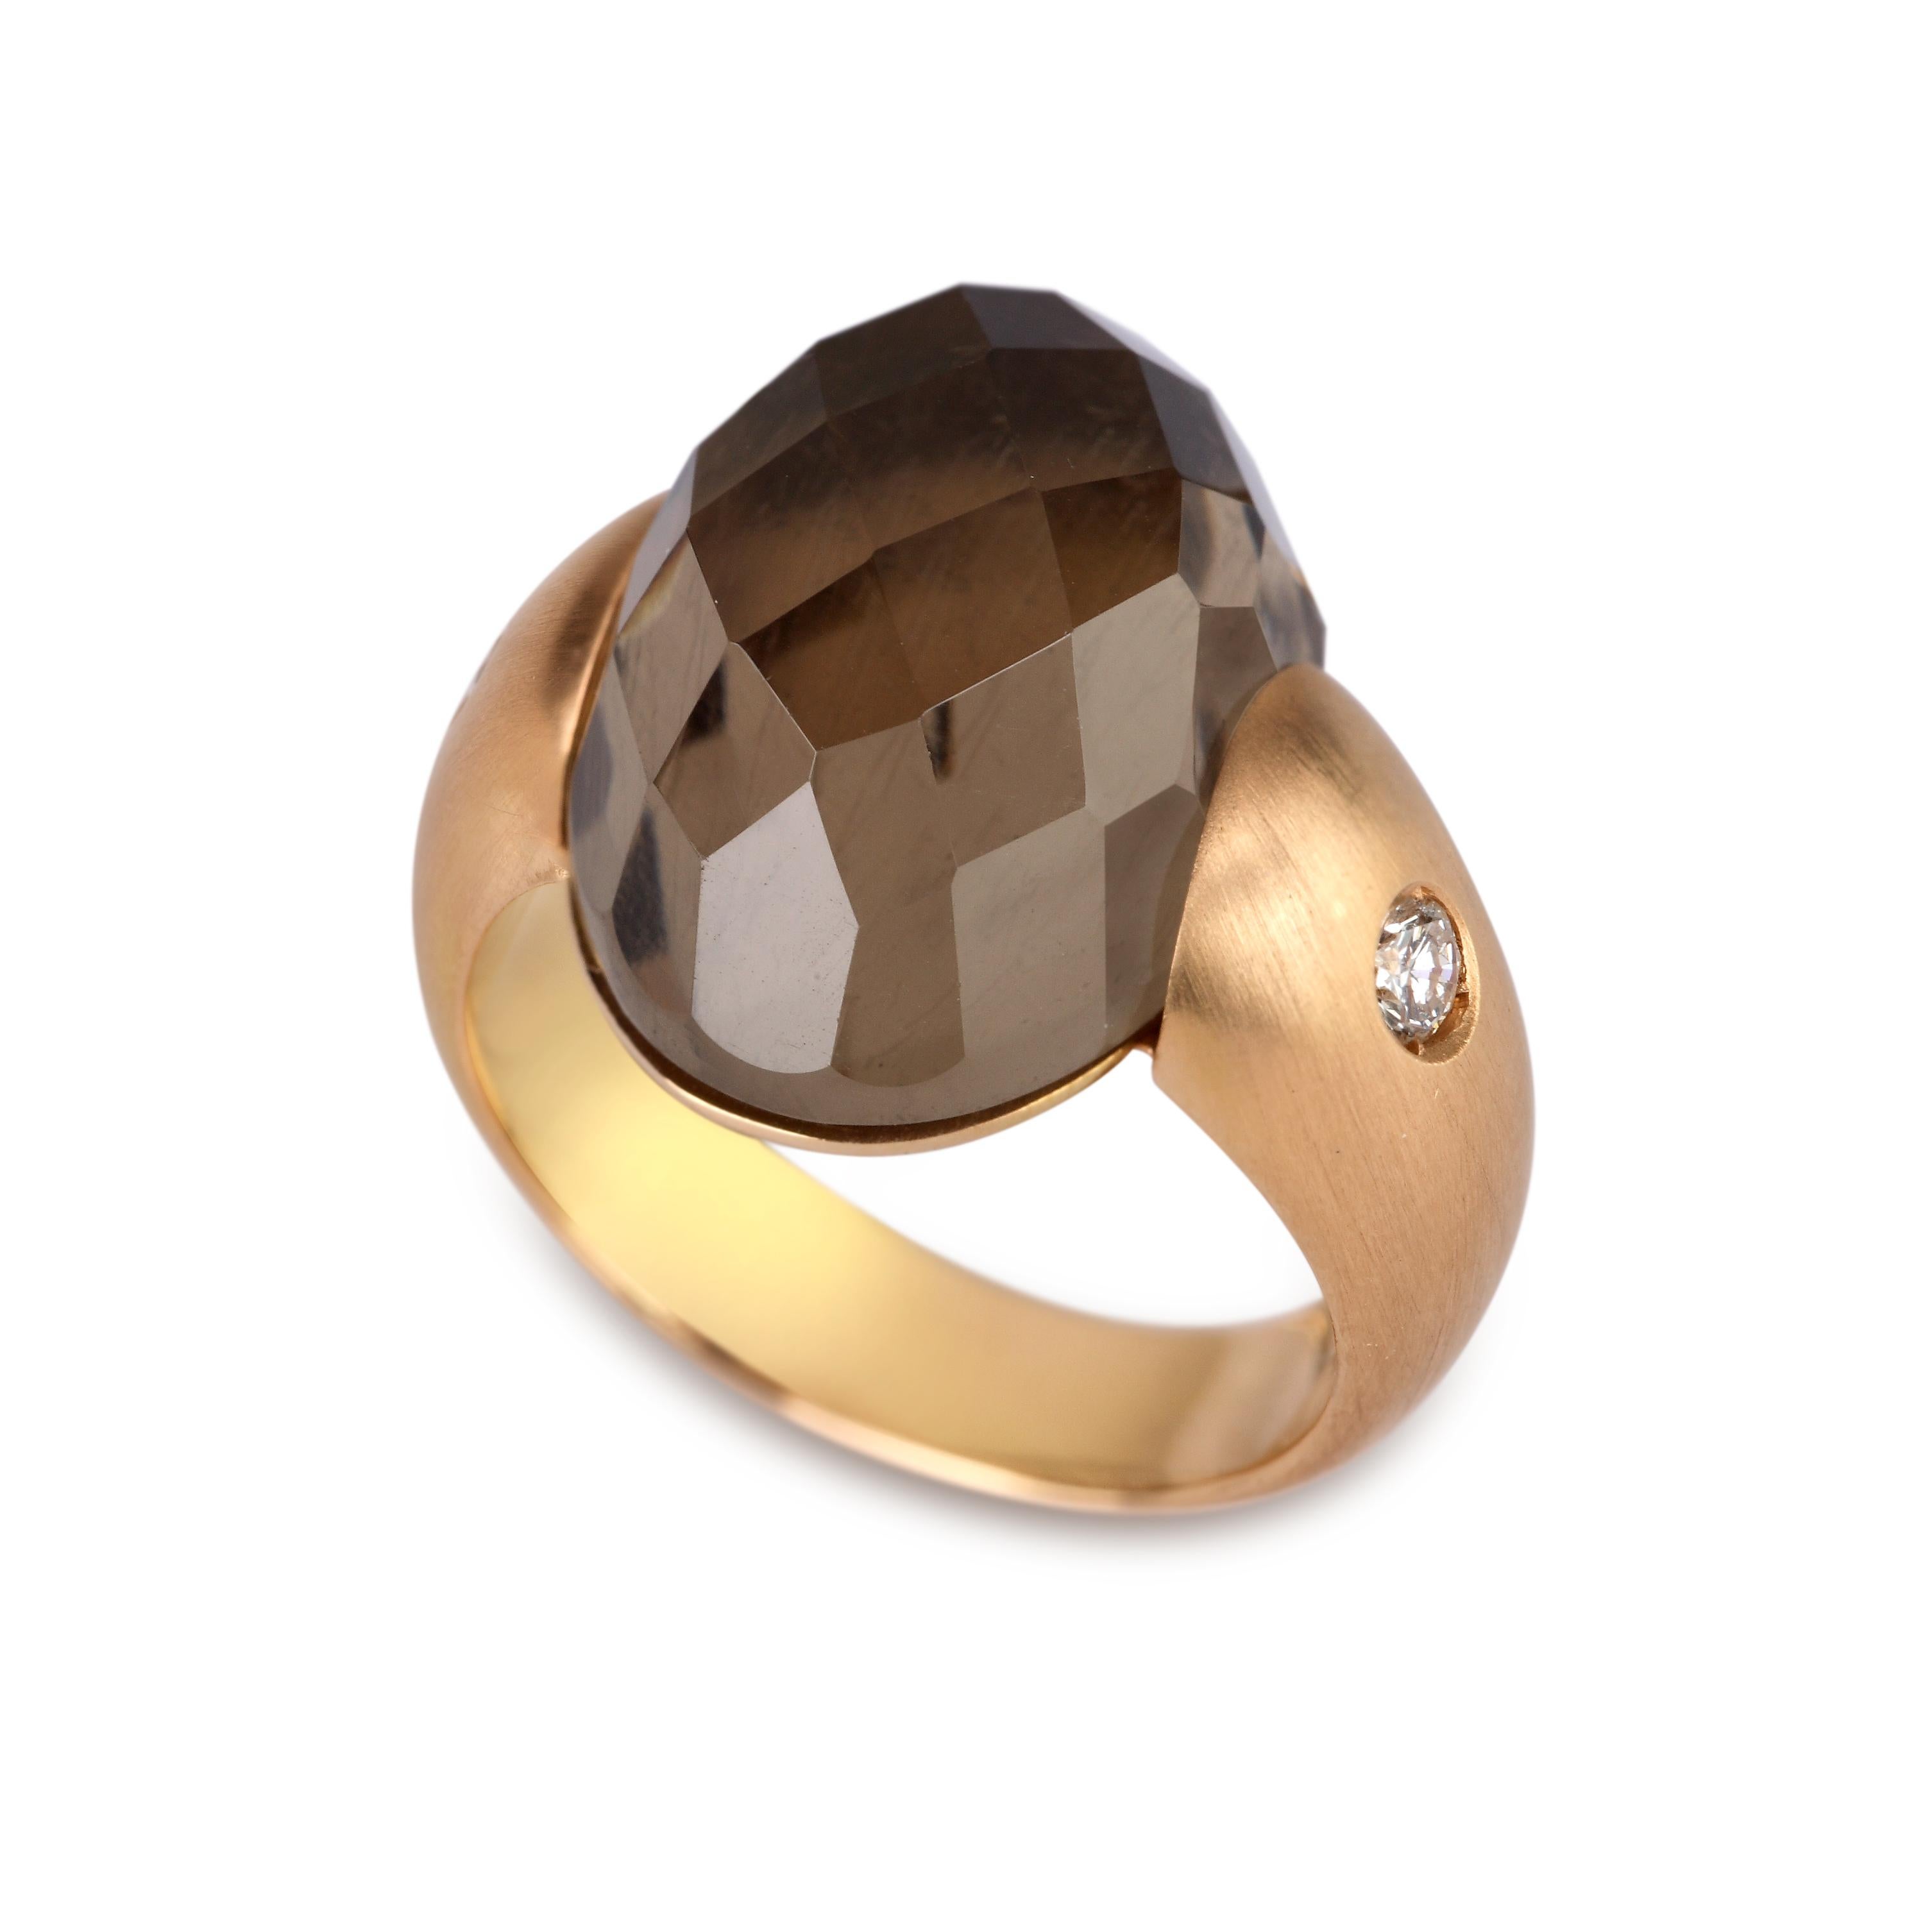 Embrace Collection by Angeletti. Rose  Gold Ring With Smoky Quartz and Diamonds.
Iconic Embrace Model, Designed and Manifactured in Rome.
On the side of the Smoky Quartz, two diamonds  ct. 0.16. Gold Weight is Around 9 gr.
Very Confortable for a